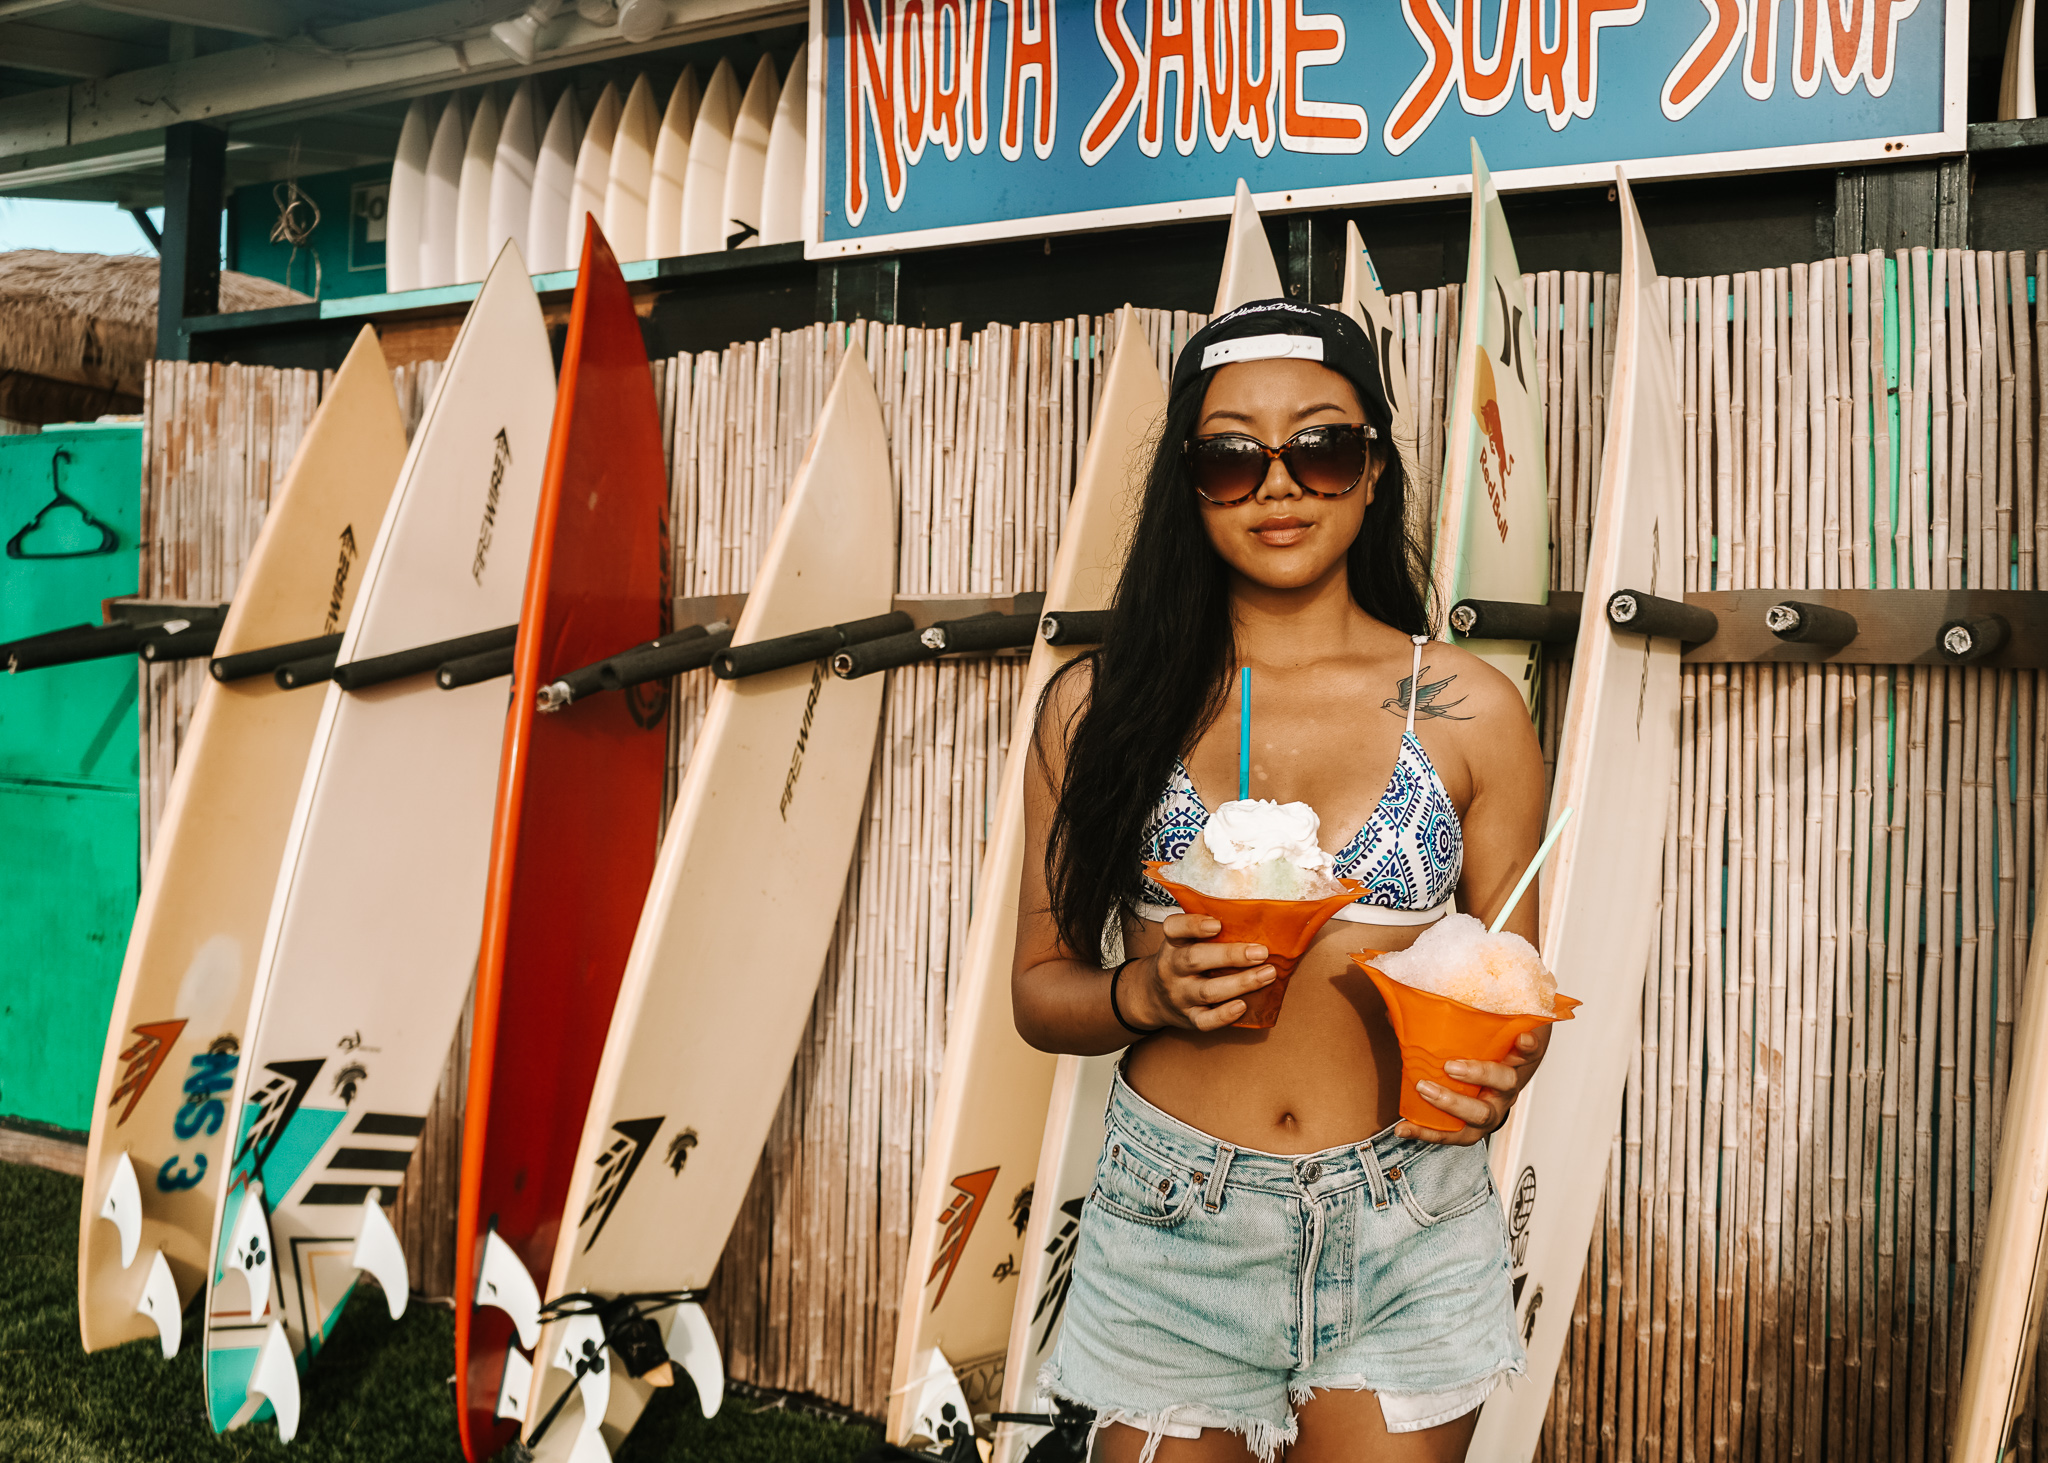 when visiting hawaii you must eat shave ice